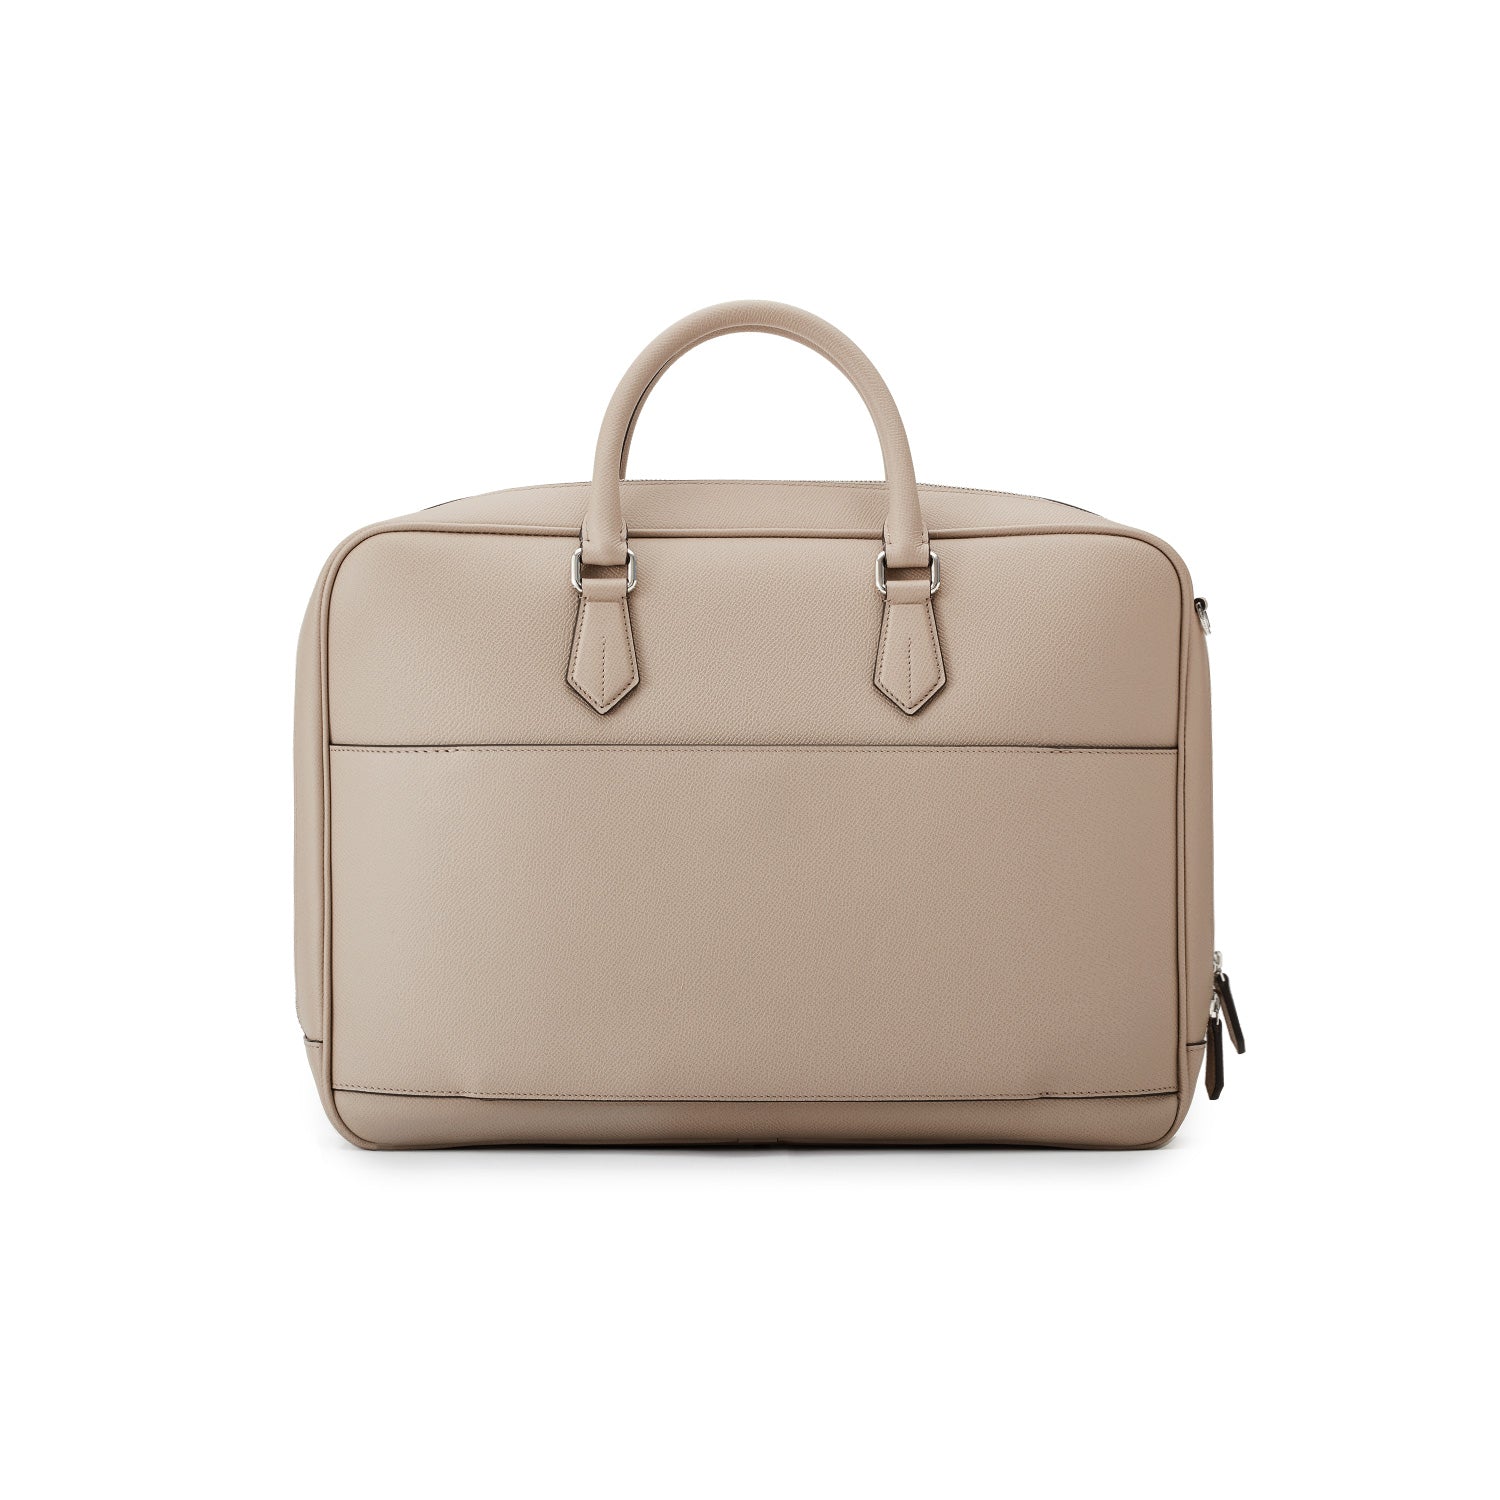 Jackson Briefcase Type 2 Noblesse Leather